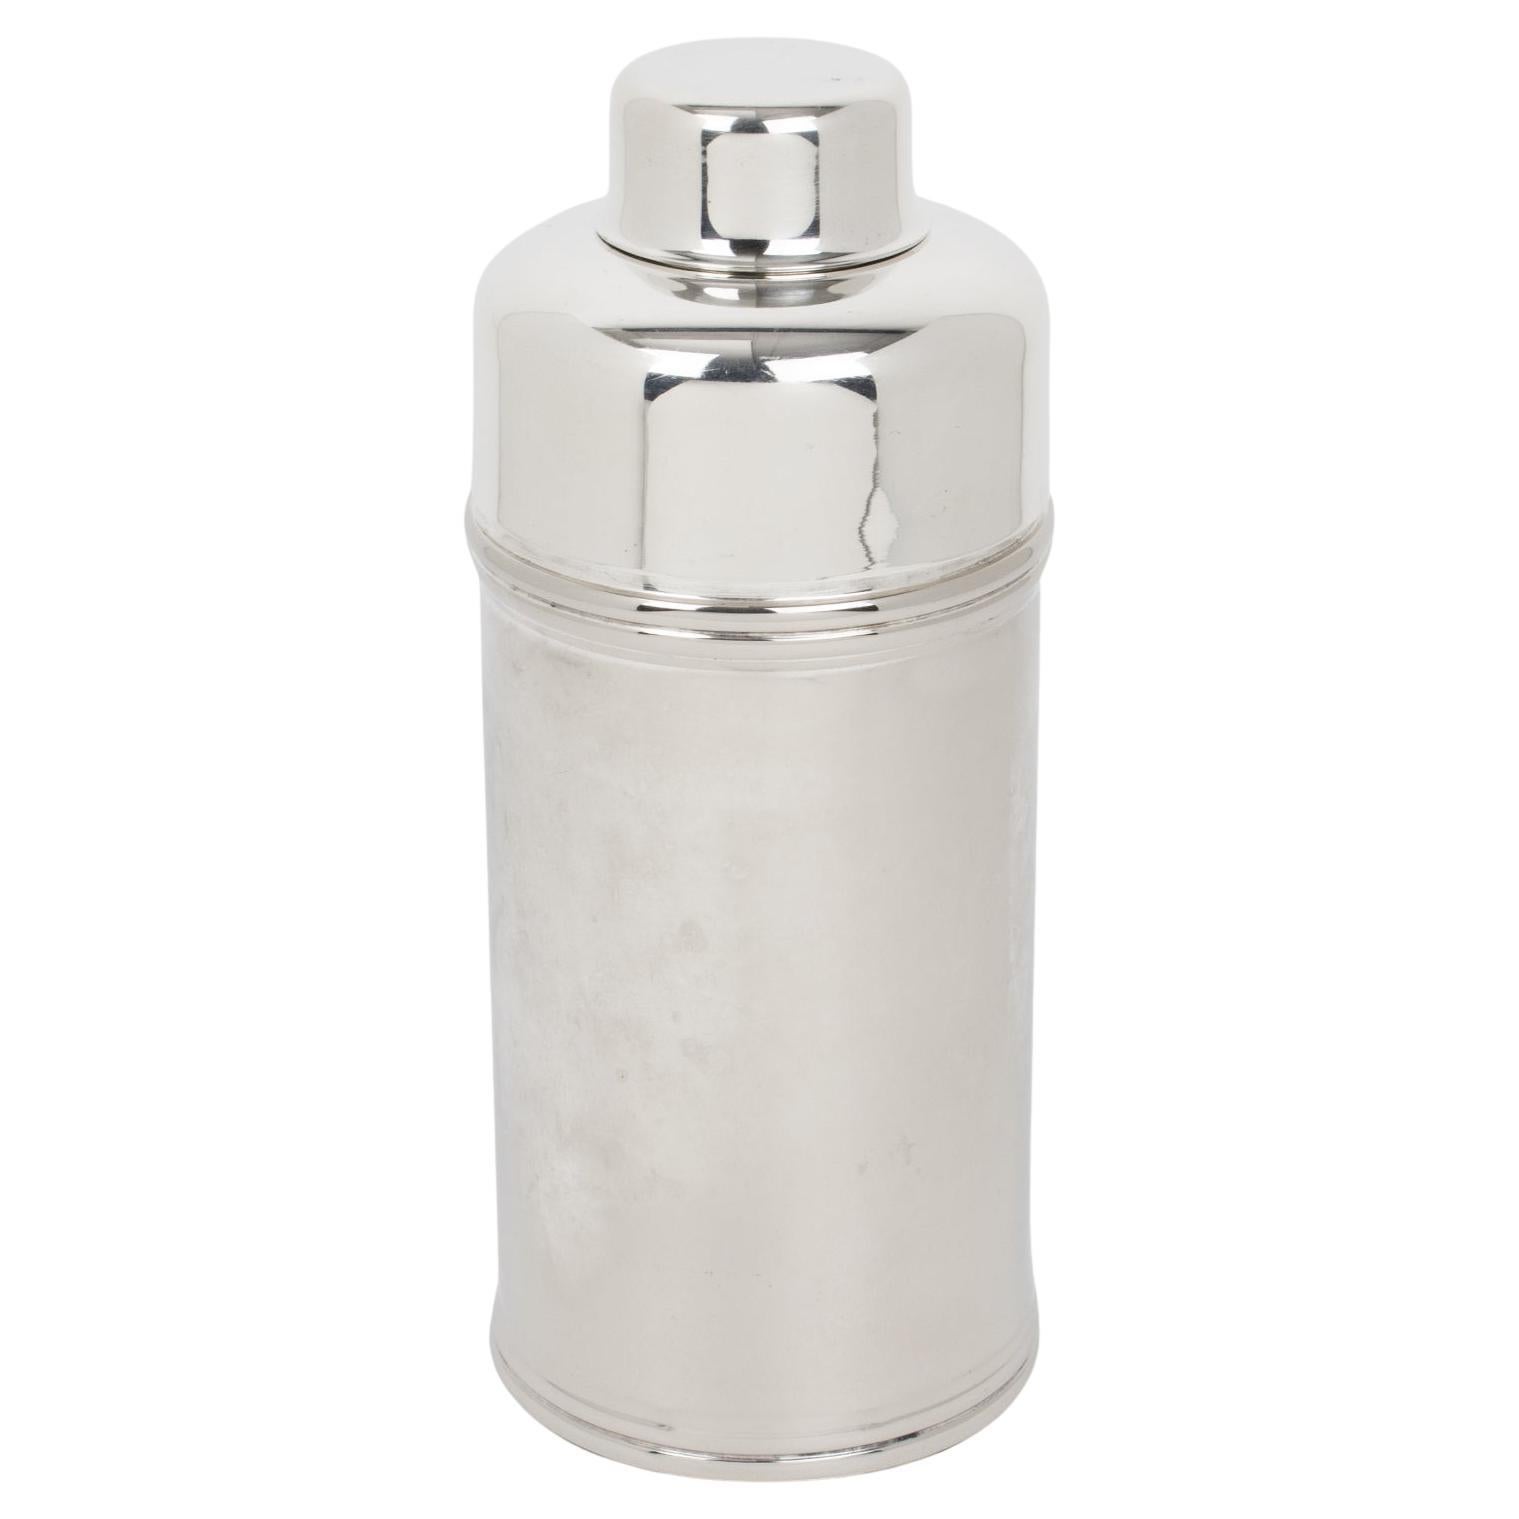 Cesa 1882, Italy, Modernist Silver Plate Cocktail Shaker For Sale